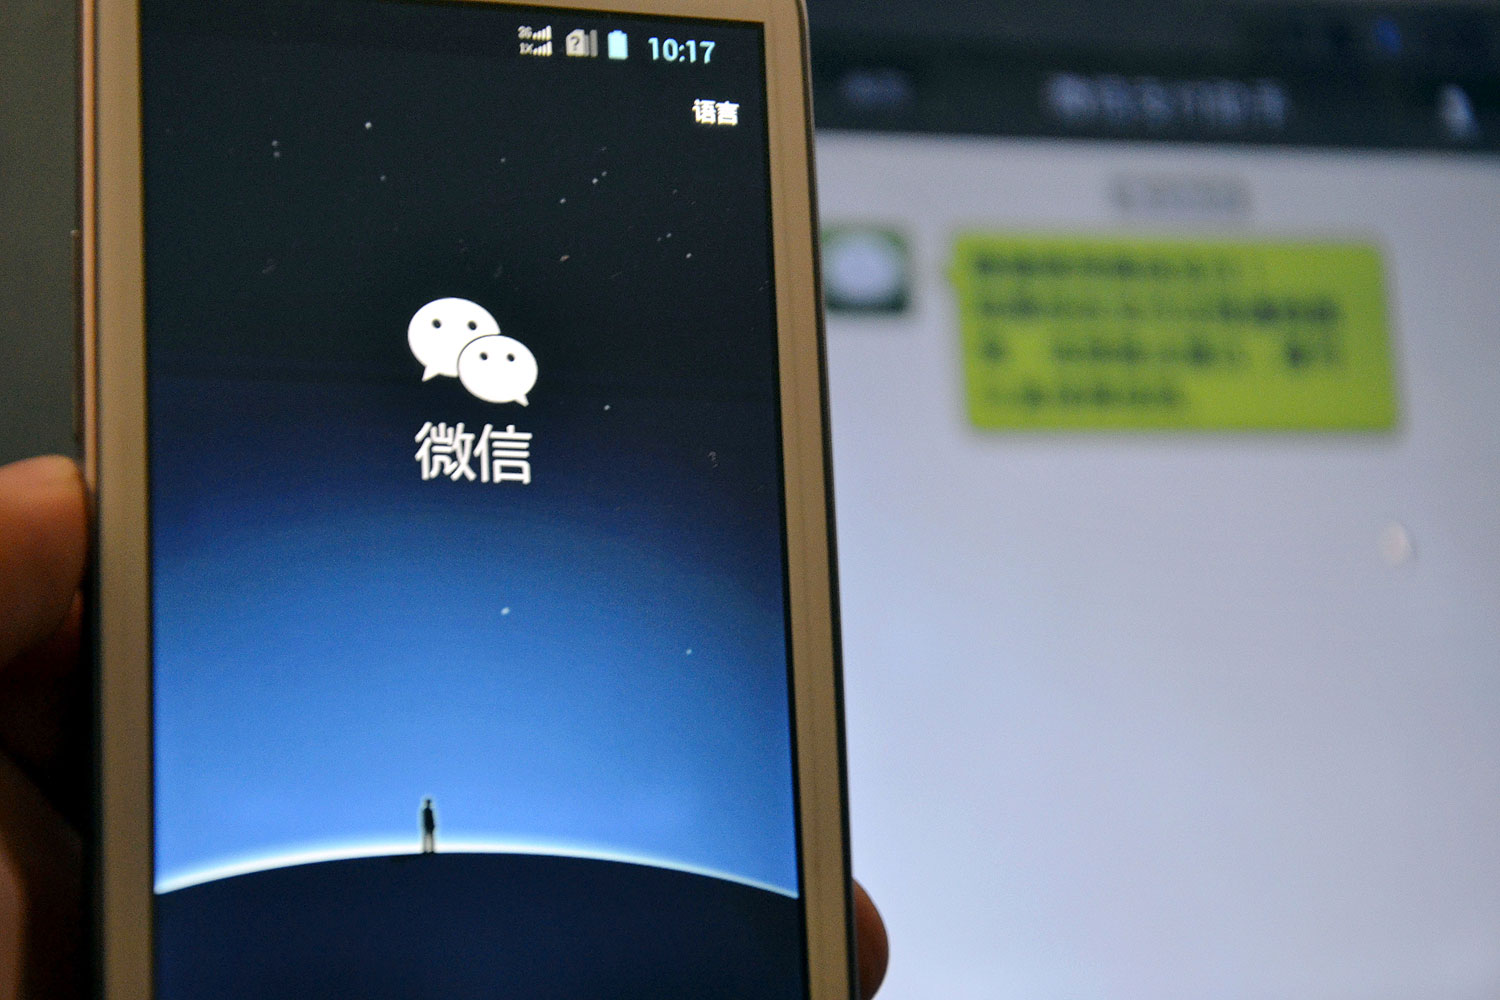 A mobile phone user uses the mobile messaging app WeChat of Tencent on a smartphone in Wenling, east Chinas Zhejiang province, 19 Oct. 2013 (Imaginechina / AP)